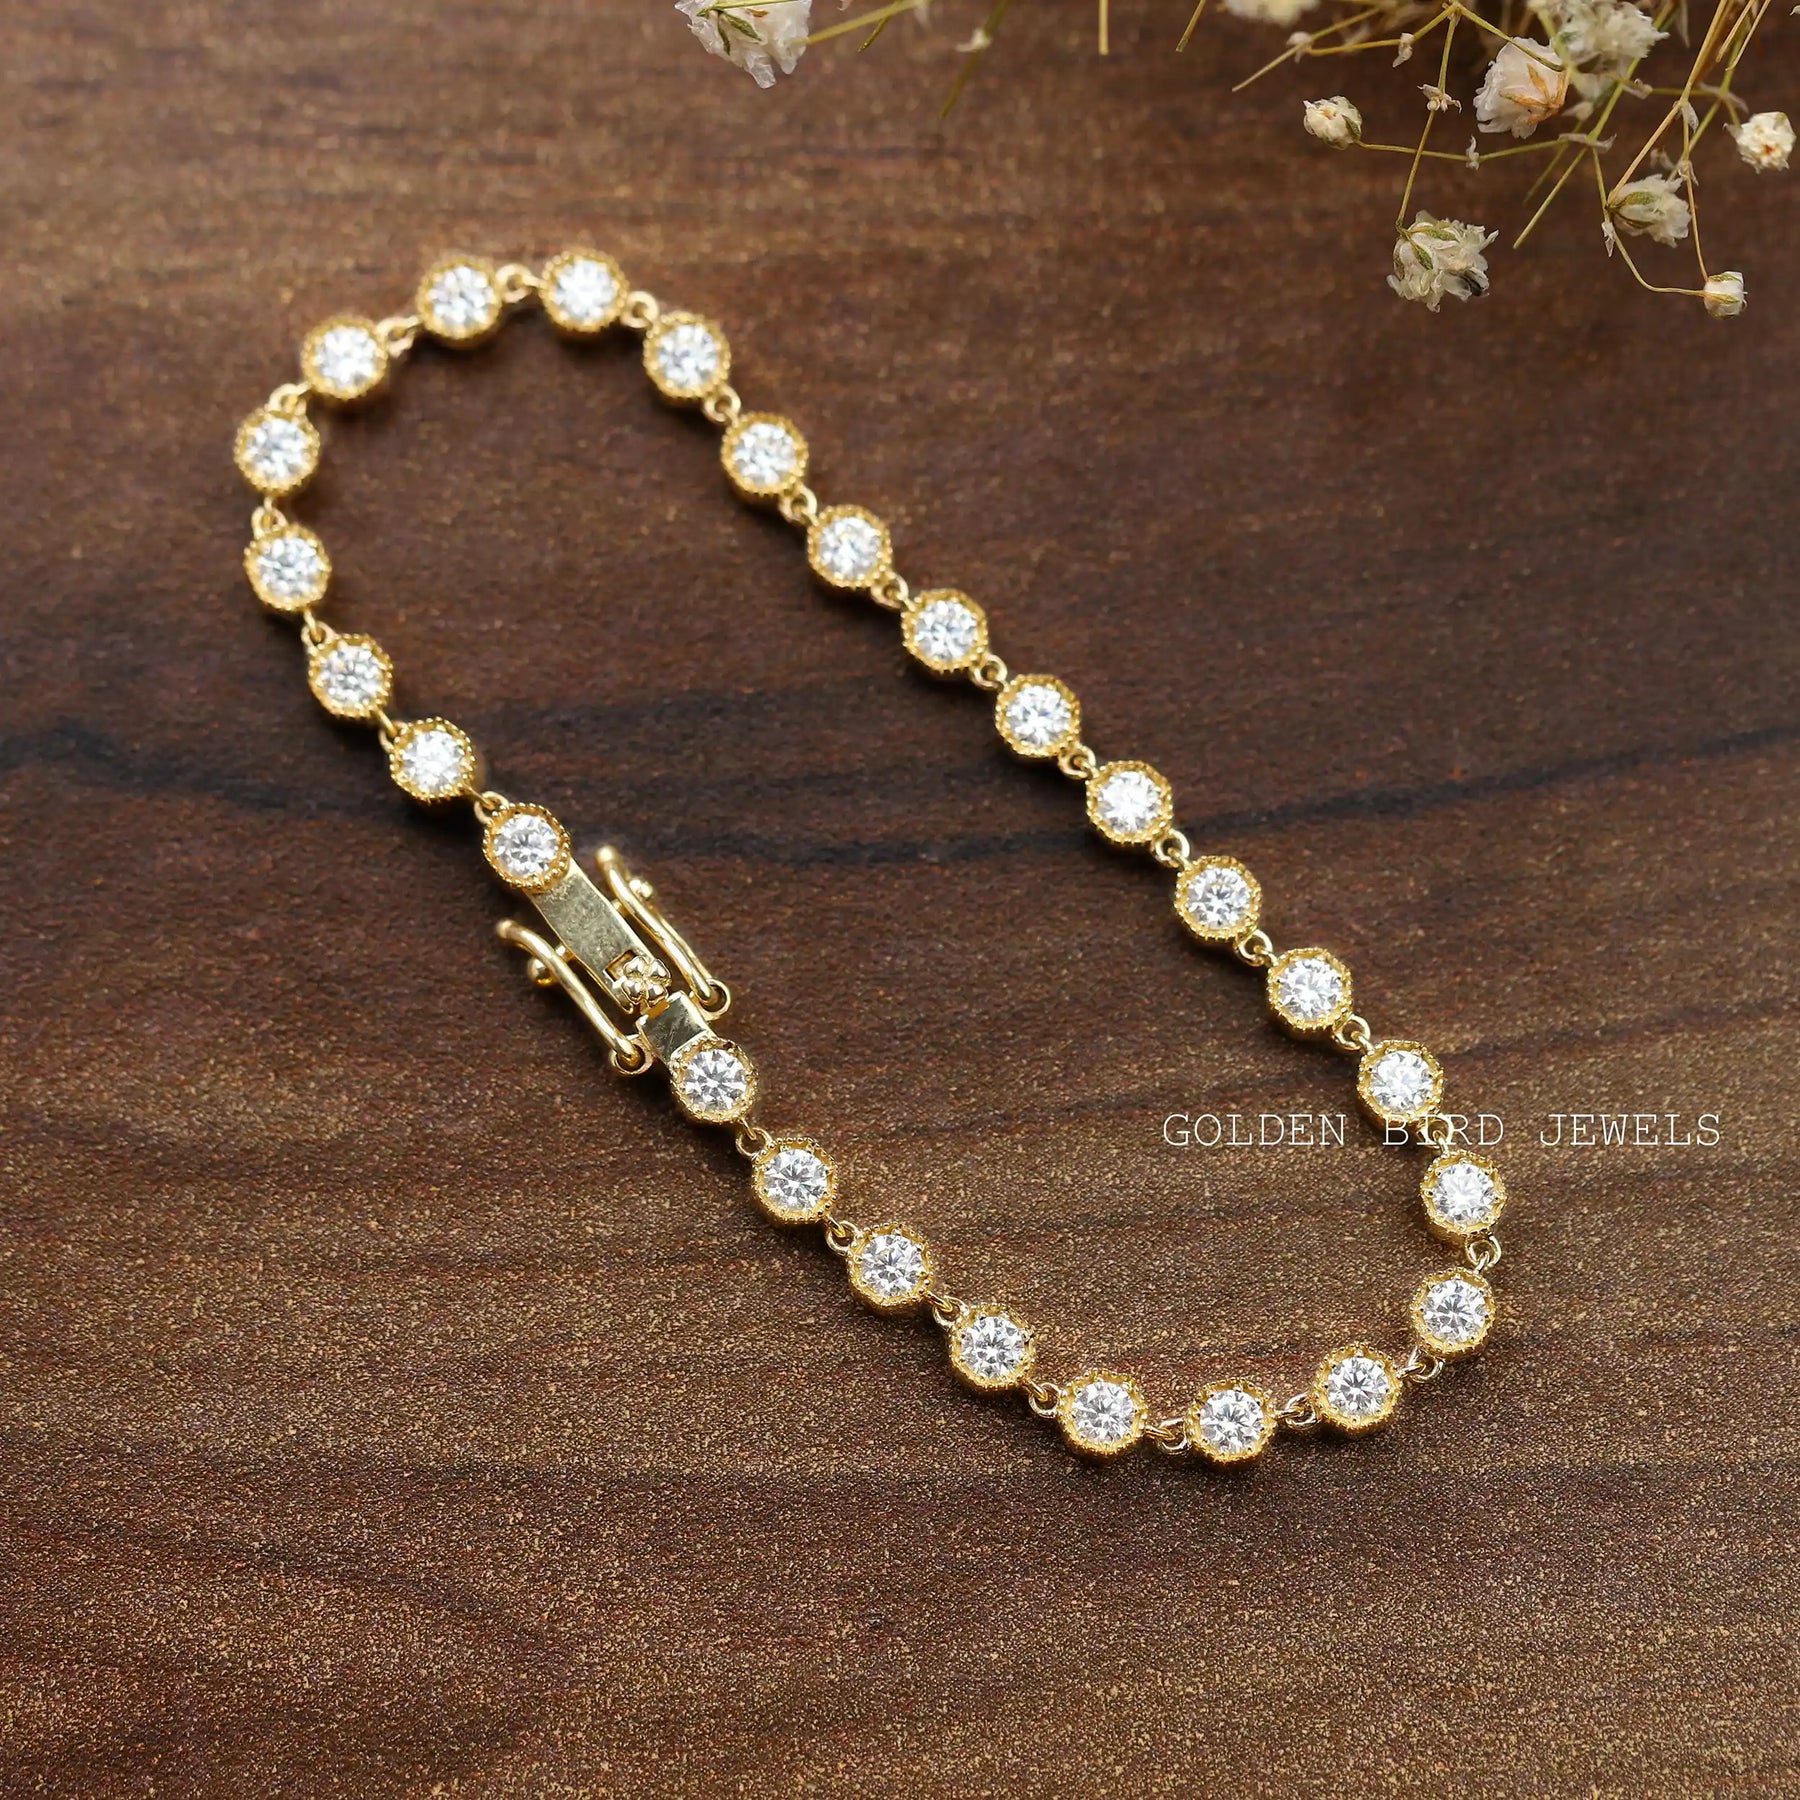 [This moissanite bracelet made of vvs clarity and round cut colorless stones]-[Golden Bird Jewels]